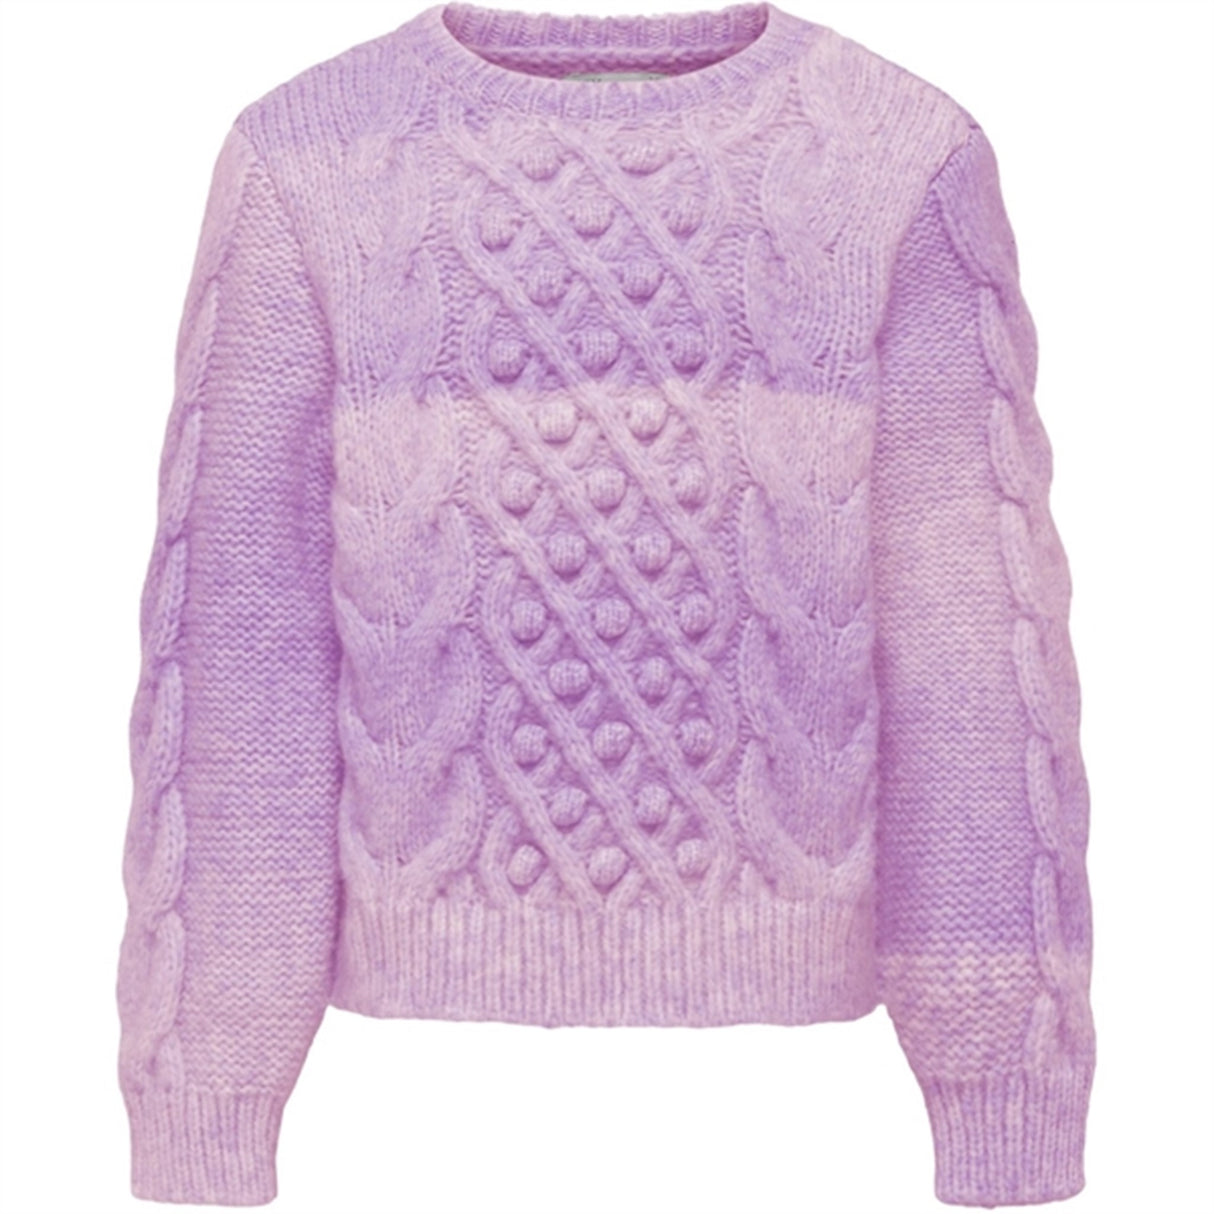 Kids ONLY Lavendula Space dyed Live Cable Knit Blouse